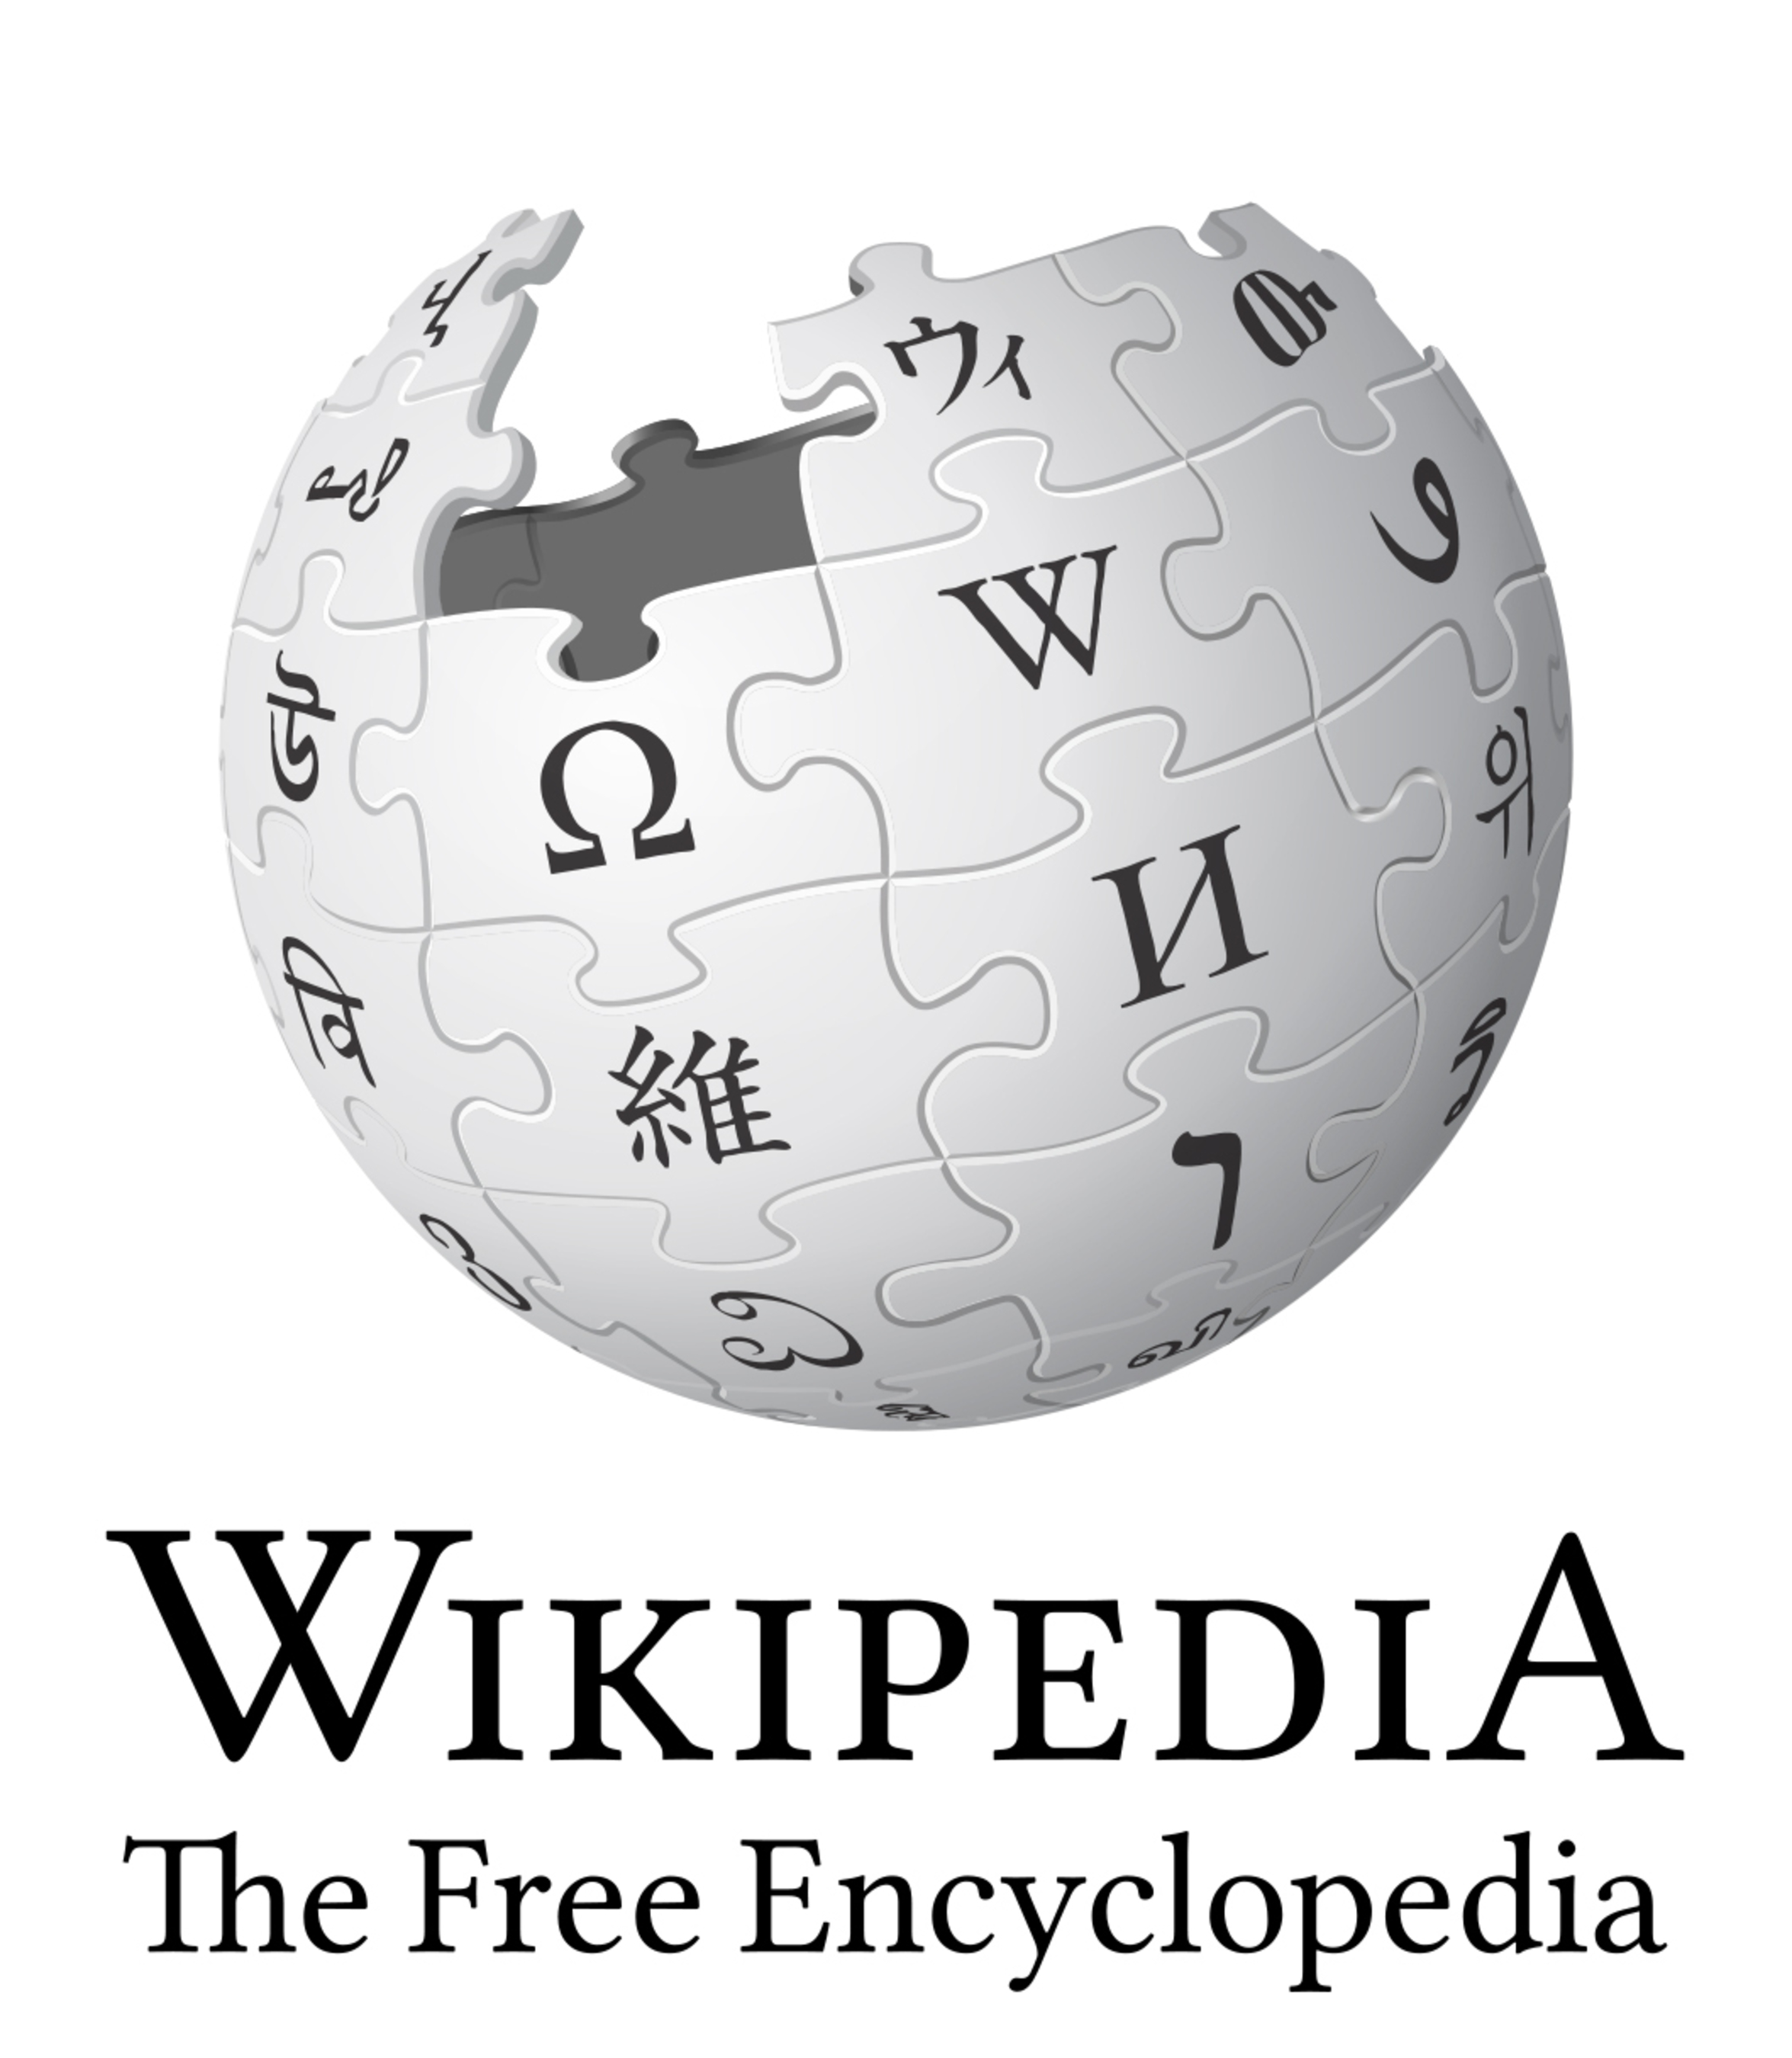 Erasmus Prize 2015 for Wikipedia.Wikipedia receives the prize because it has promoted the dissemination of knowledge through a comprehensive and universally accessible encyclopaedia. (PRNewsFoto/Praemium Erasmianum Foundation)